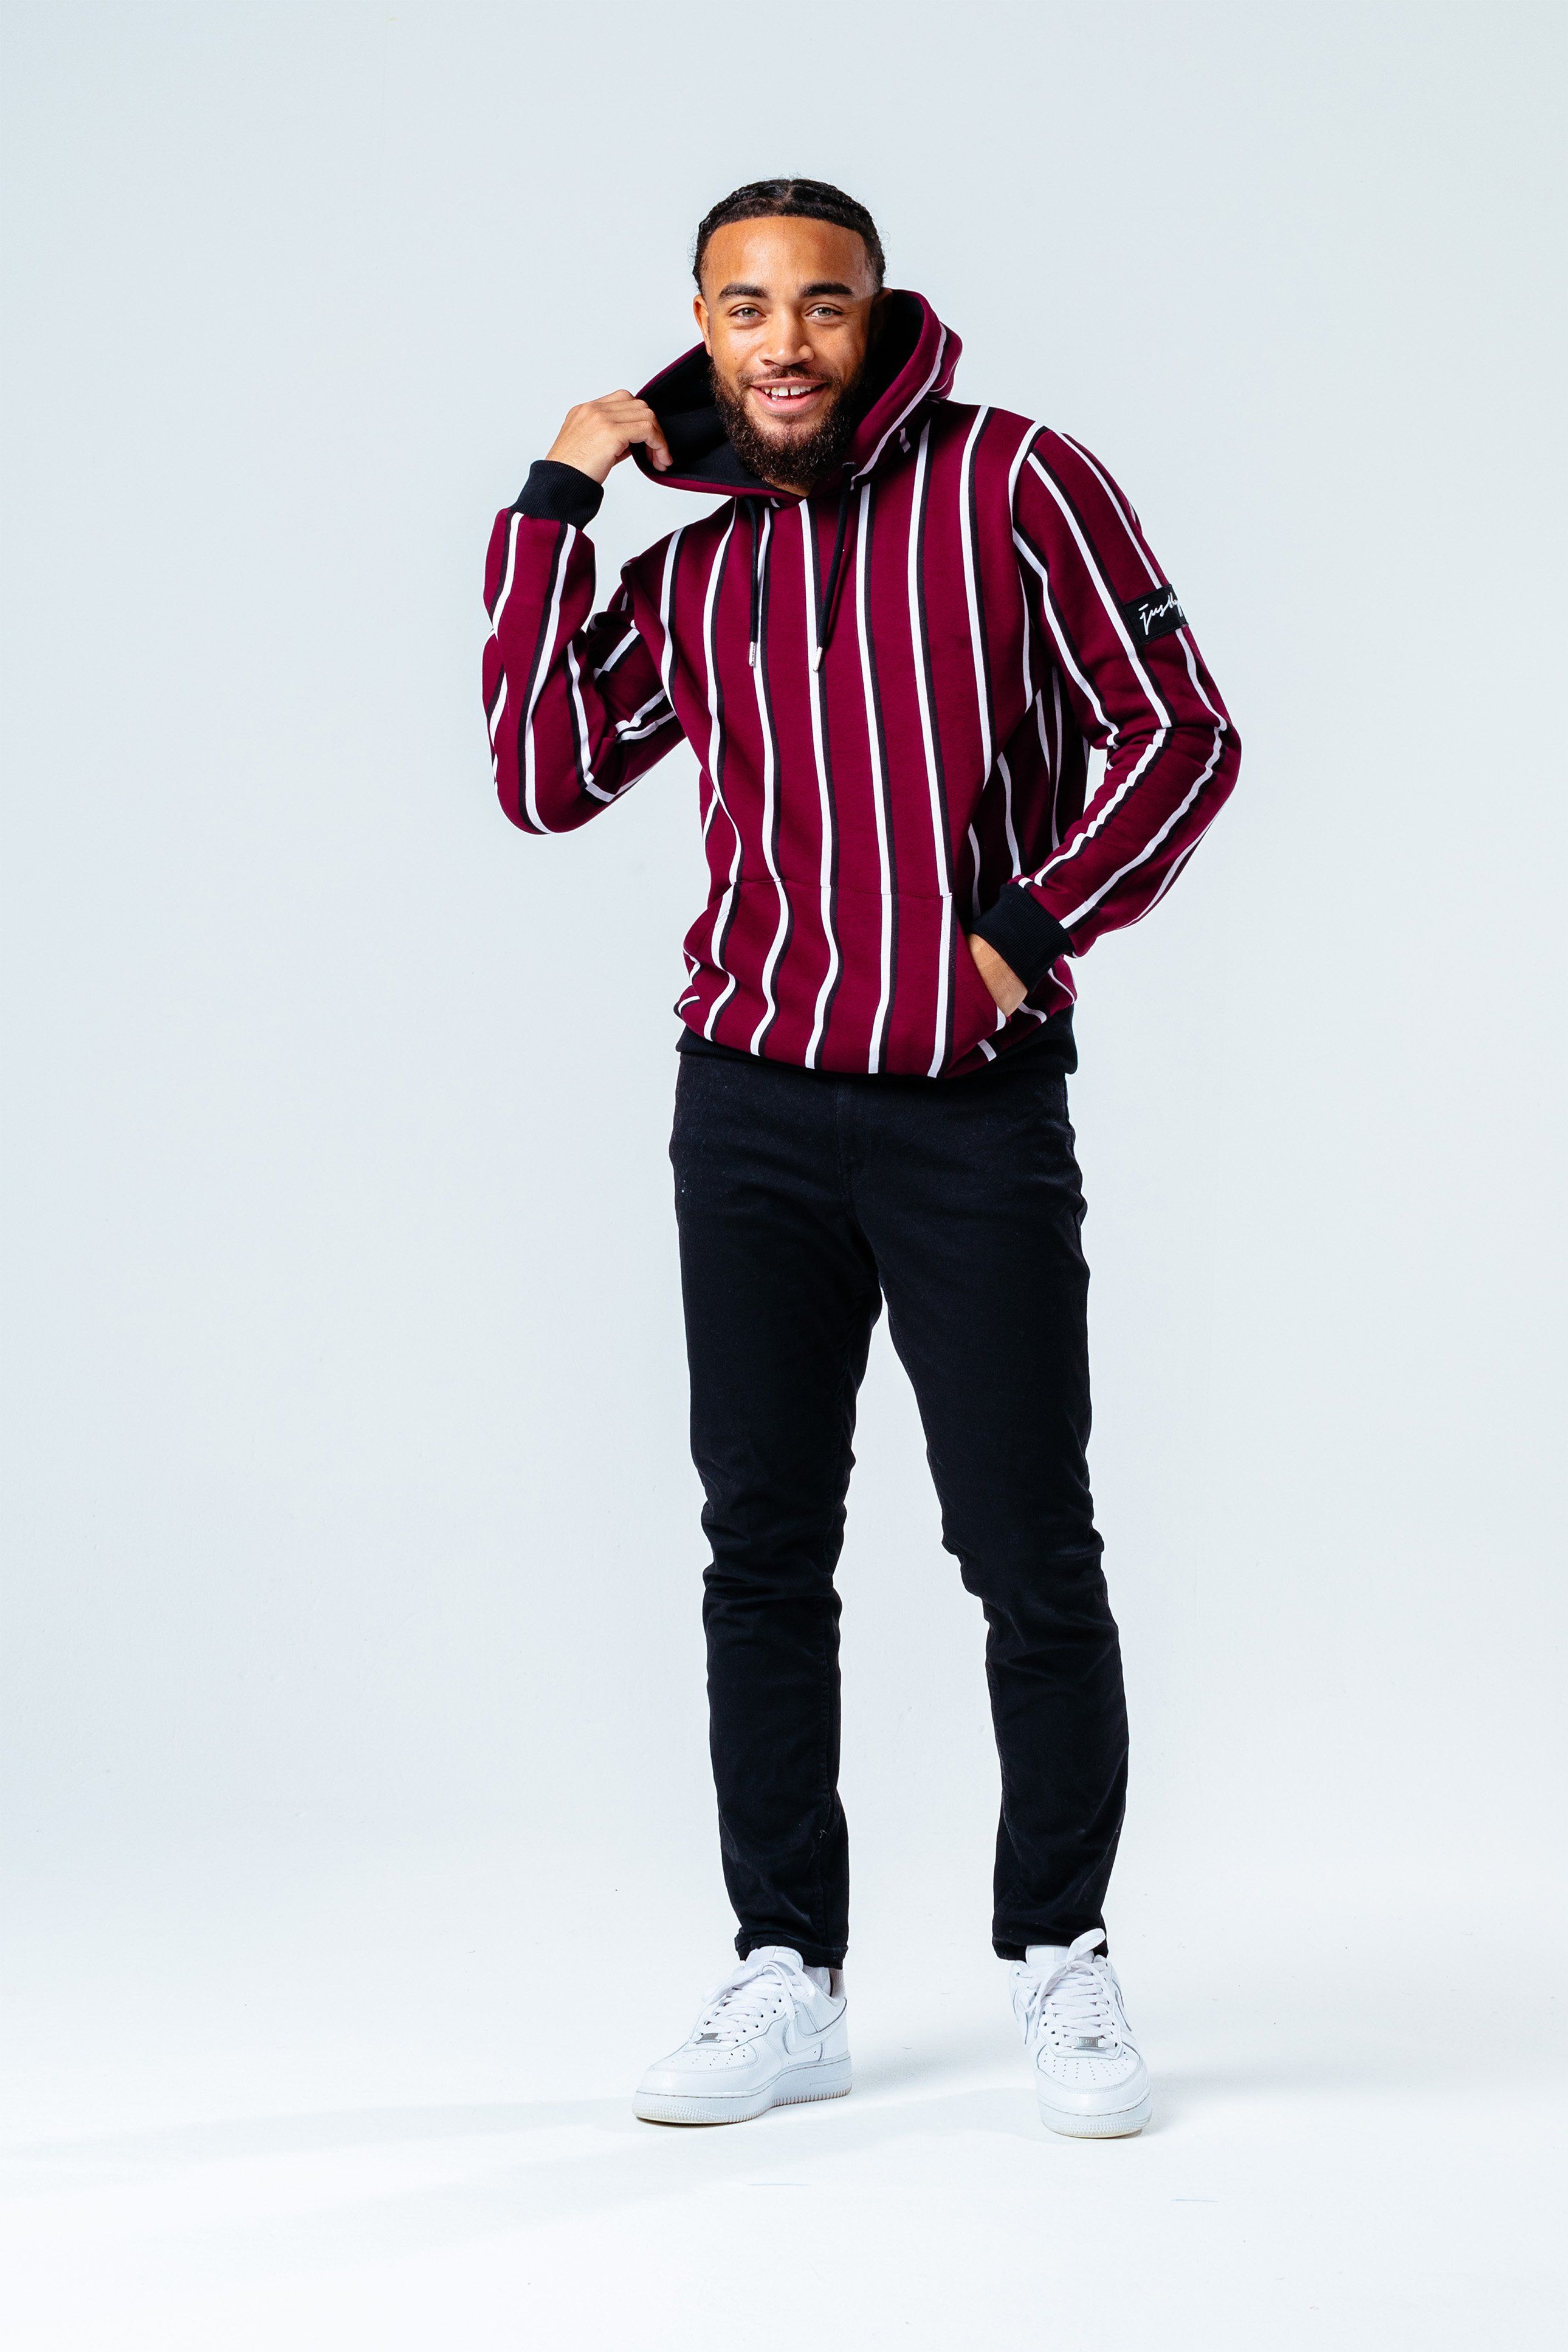 The HYPE. burgundy stripe men's hoodie pairs perfectly with the HYPE. men's black joggers for an off-duty relaxed look. Coming in with a burgundy, white and black colour palette in an 80% cotton and 20% polyester fabric base for supreme comfort. Designed in our standard men's pullover shape, with a fixed hood, kangaroo pocket, elastic waist and ribbed cuffs for a snug feel, finished with an embroidered embossed patch on the sleeve. Machine wash at 30 degrees.